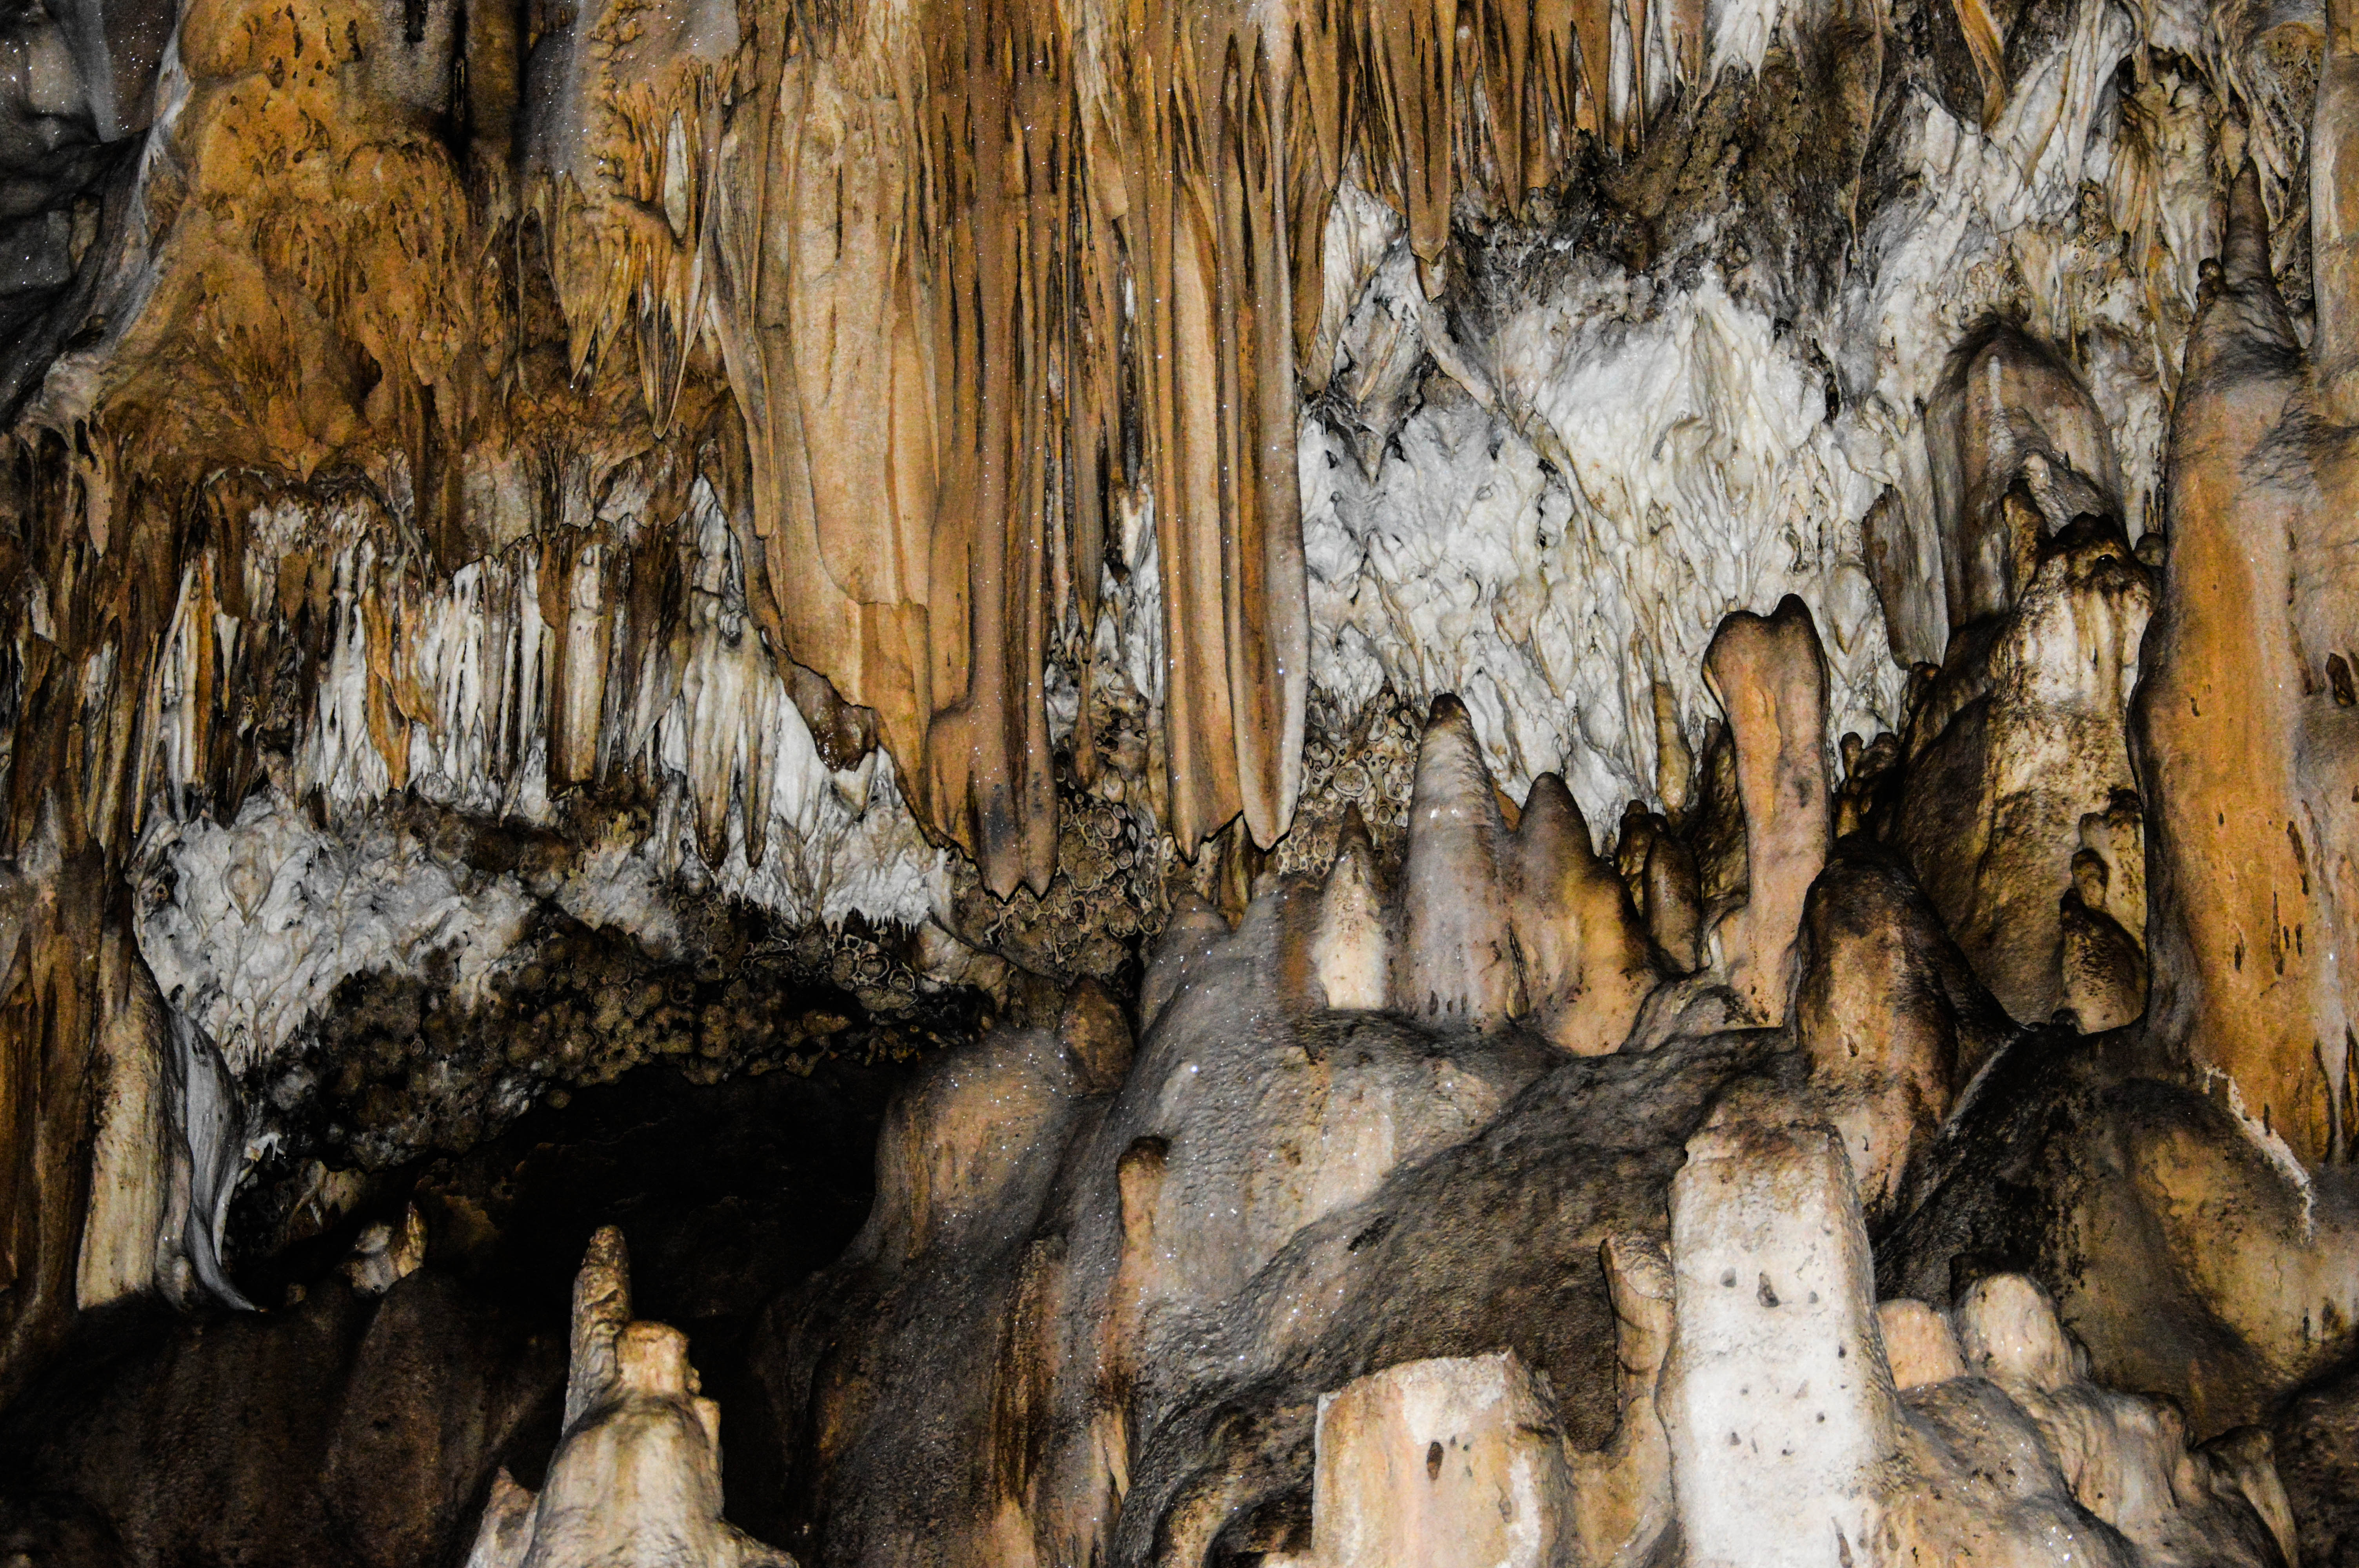 Speleothems in Cave Nefza in Tunisia [Badreddine Besbes CC-BY-SA http://bit.ly/1TqMphg]